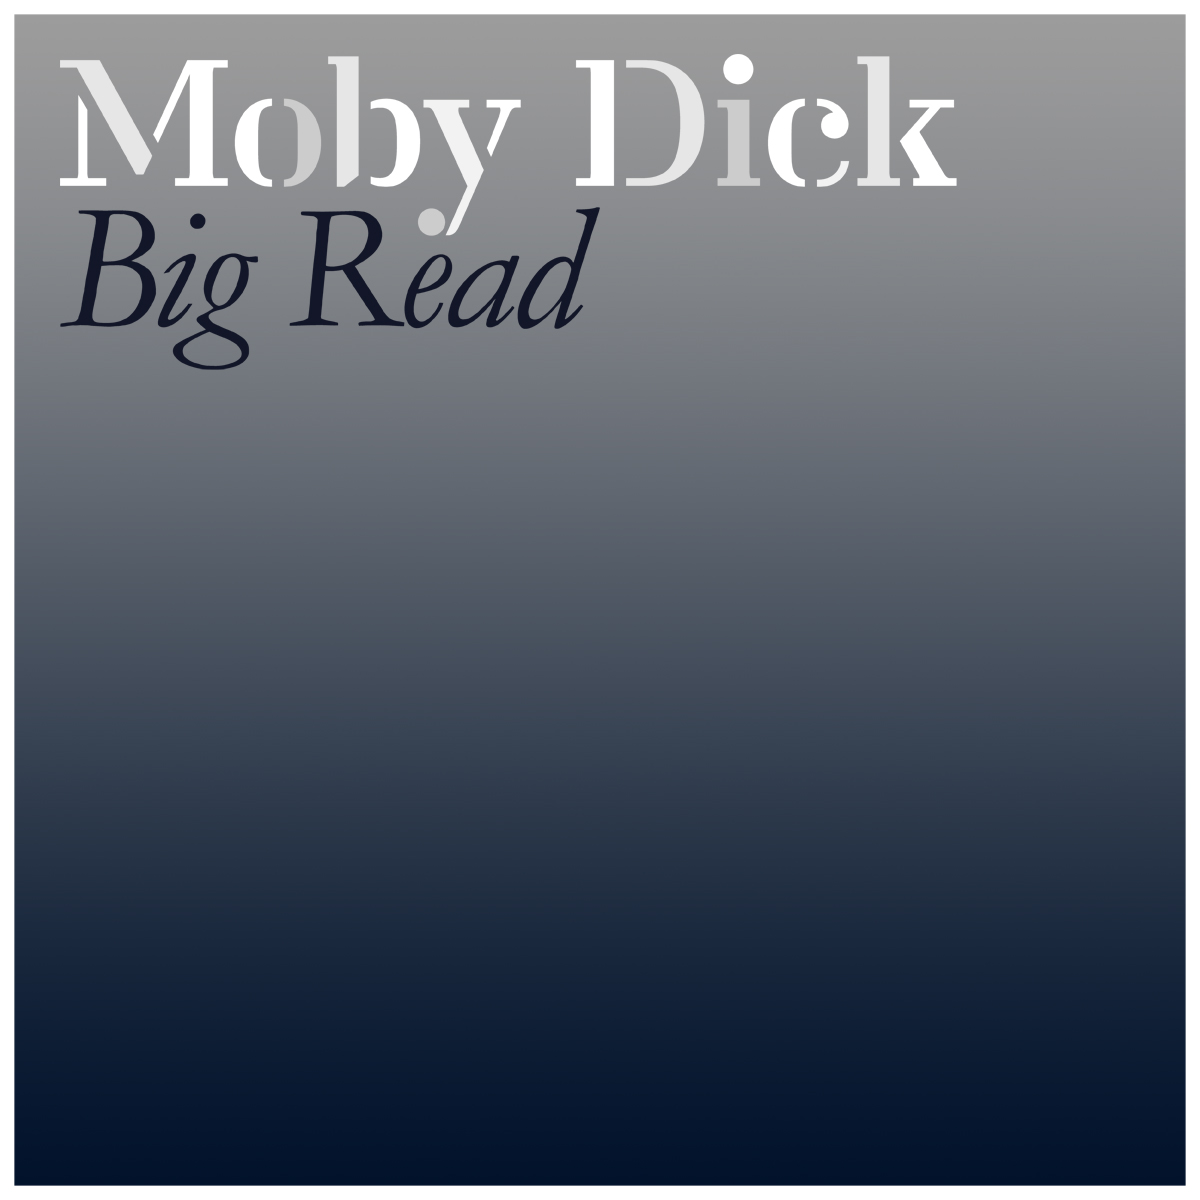 The Moby-Dick Big Read